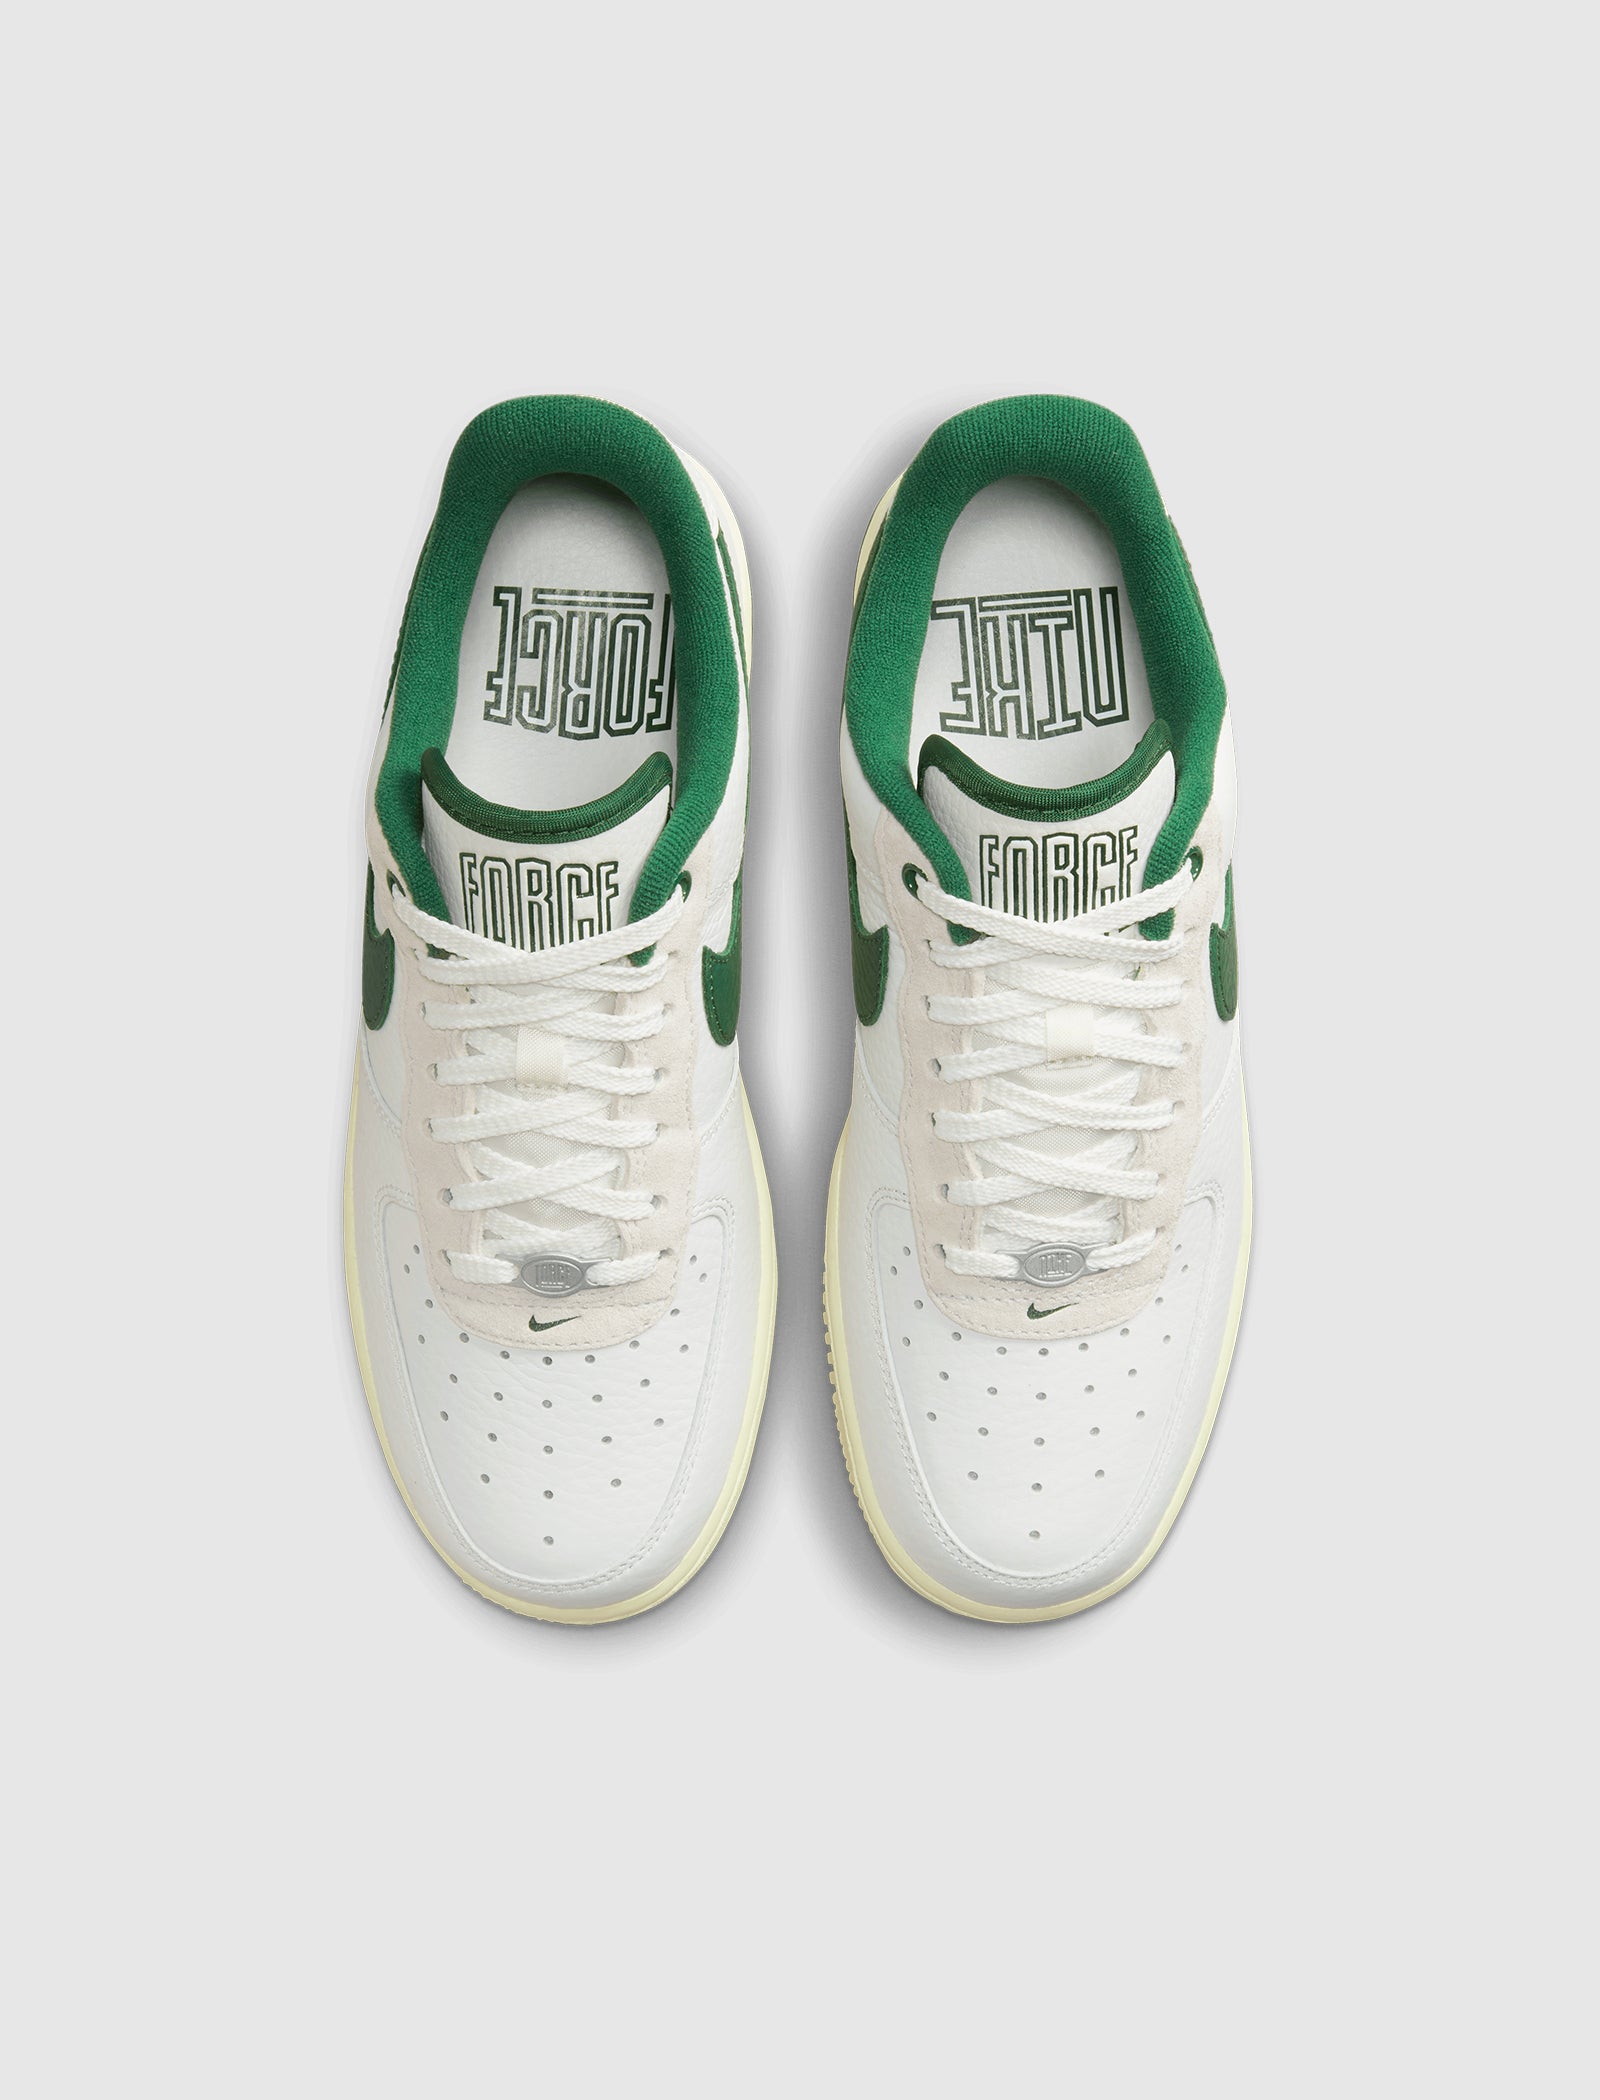 Nike Women's Air Force 1 Low Gorge Green Sneakers